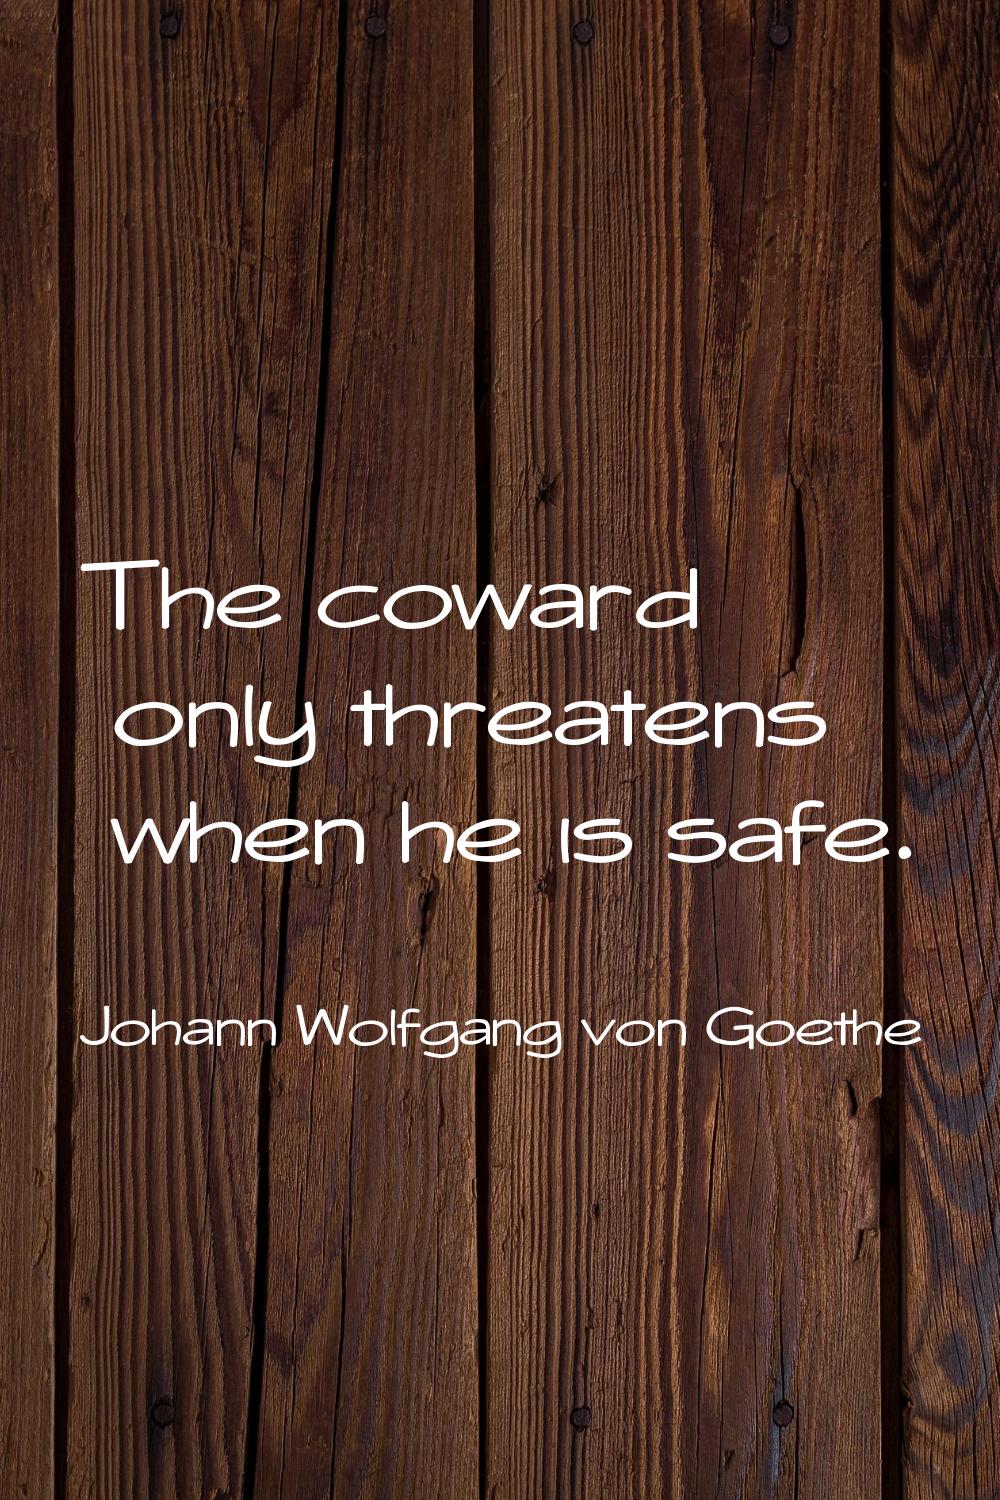 The coward only threatens when he is safe.